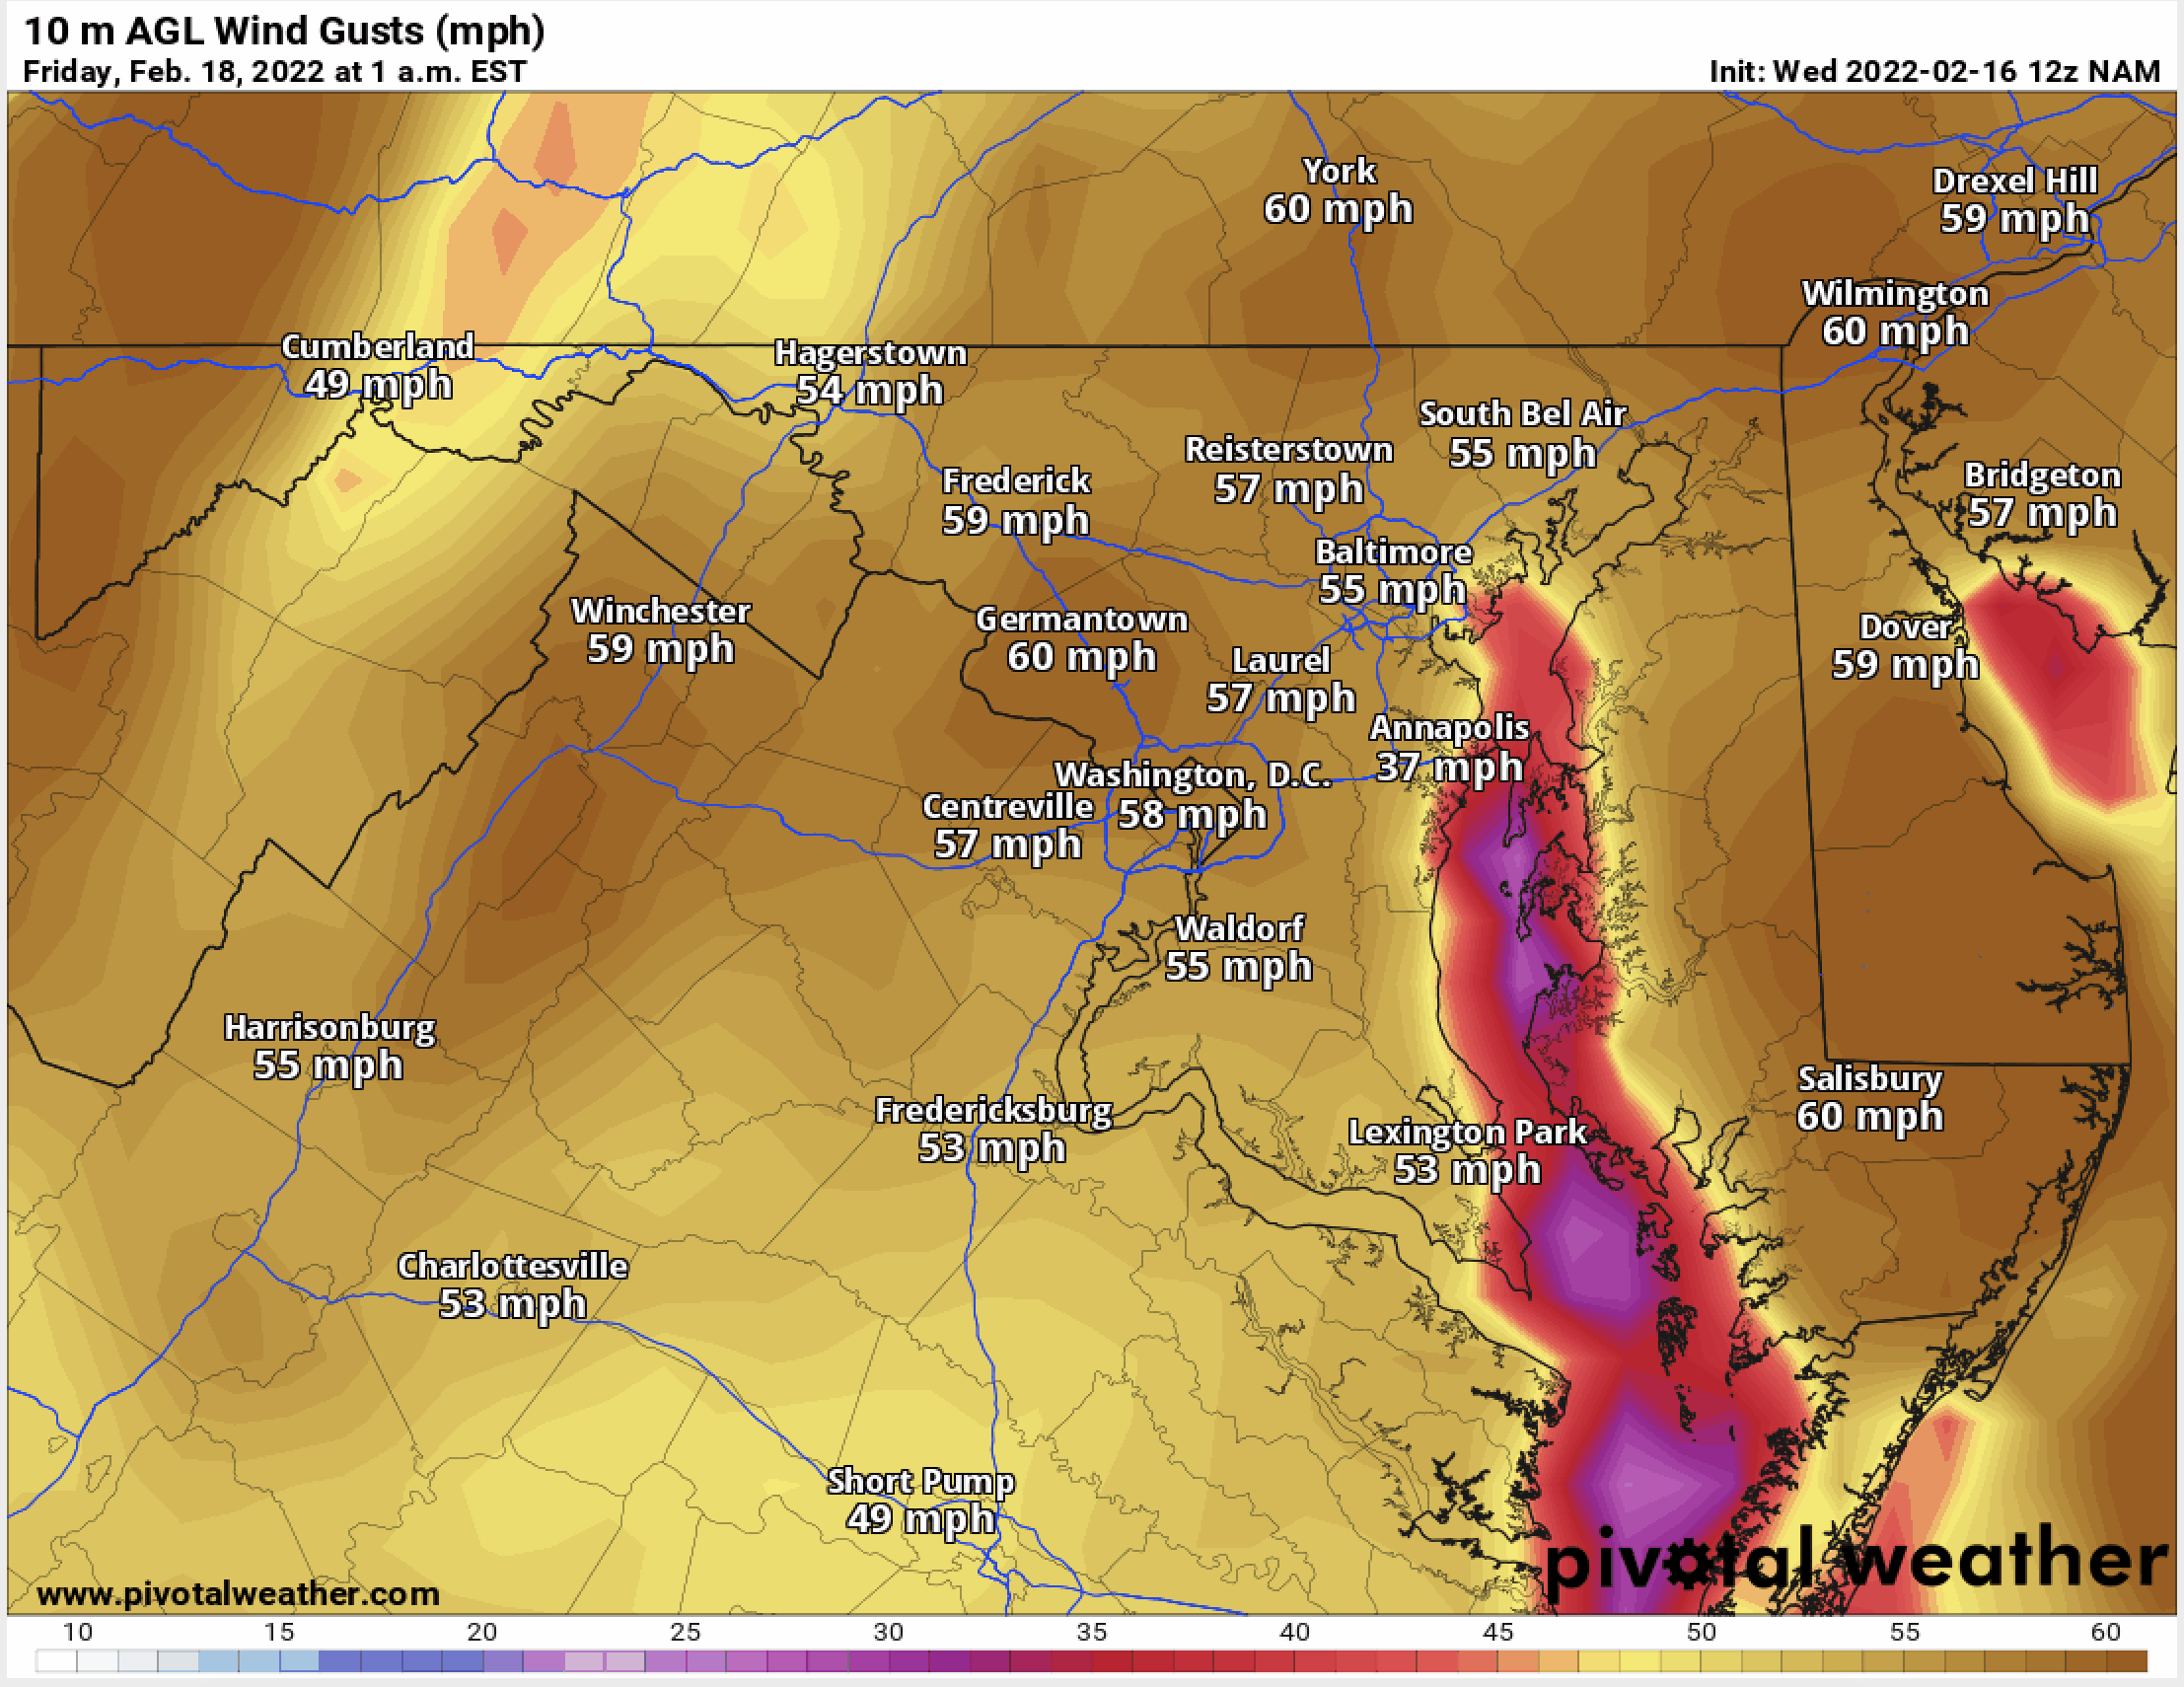 Strong gusty winds likely tomorrow night into Friday